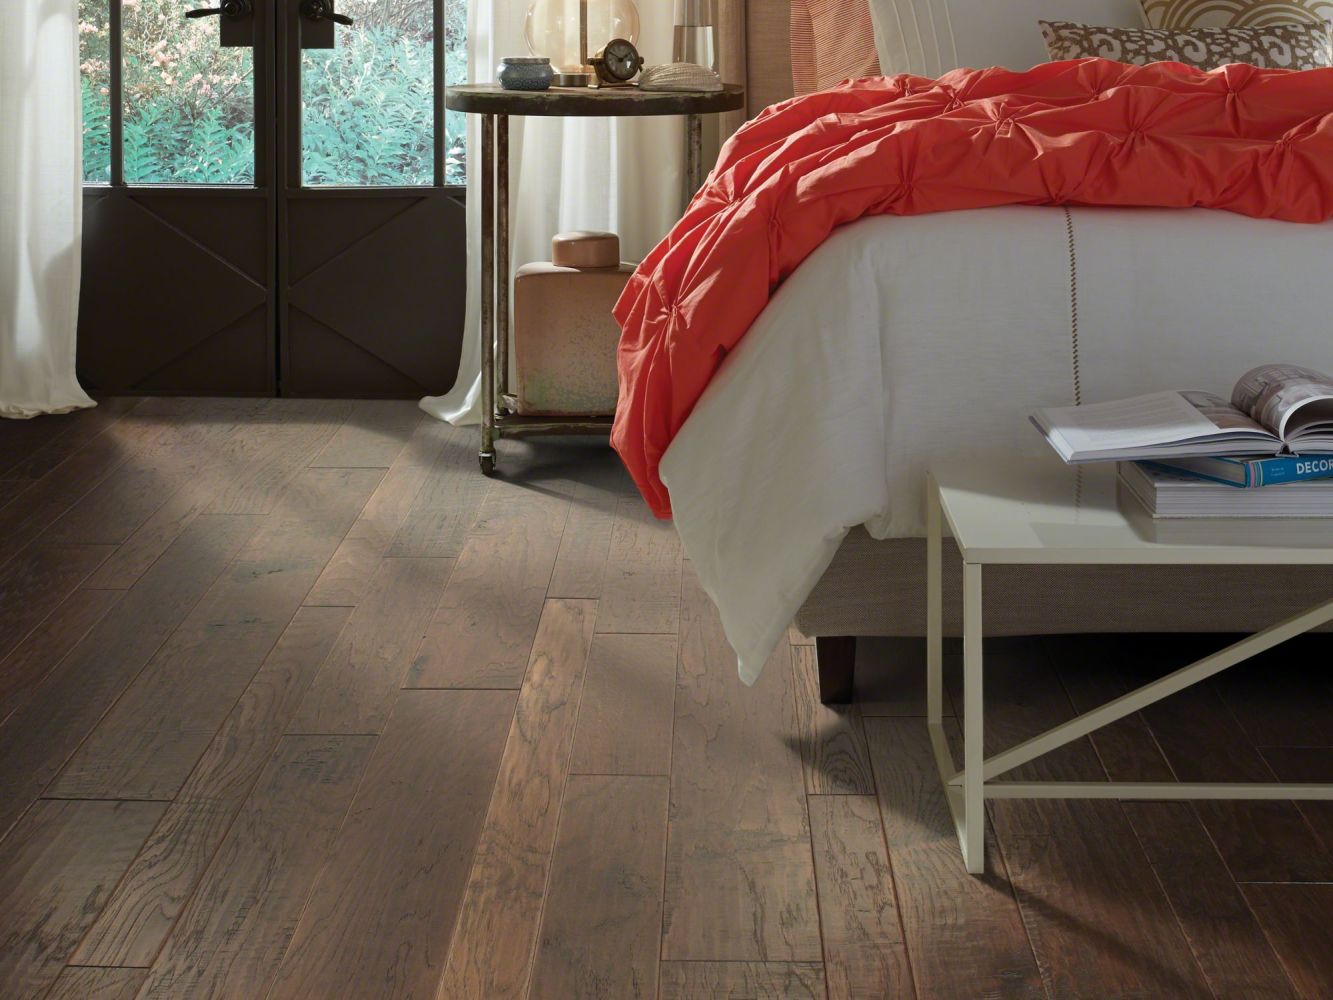 Shaw Floors Shaw Hardwoods Sequoia Hickory Mixed Width Three Rivers 00941_SW546